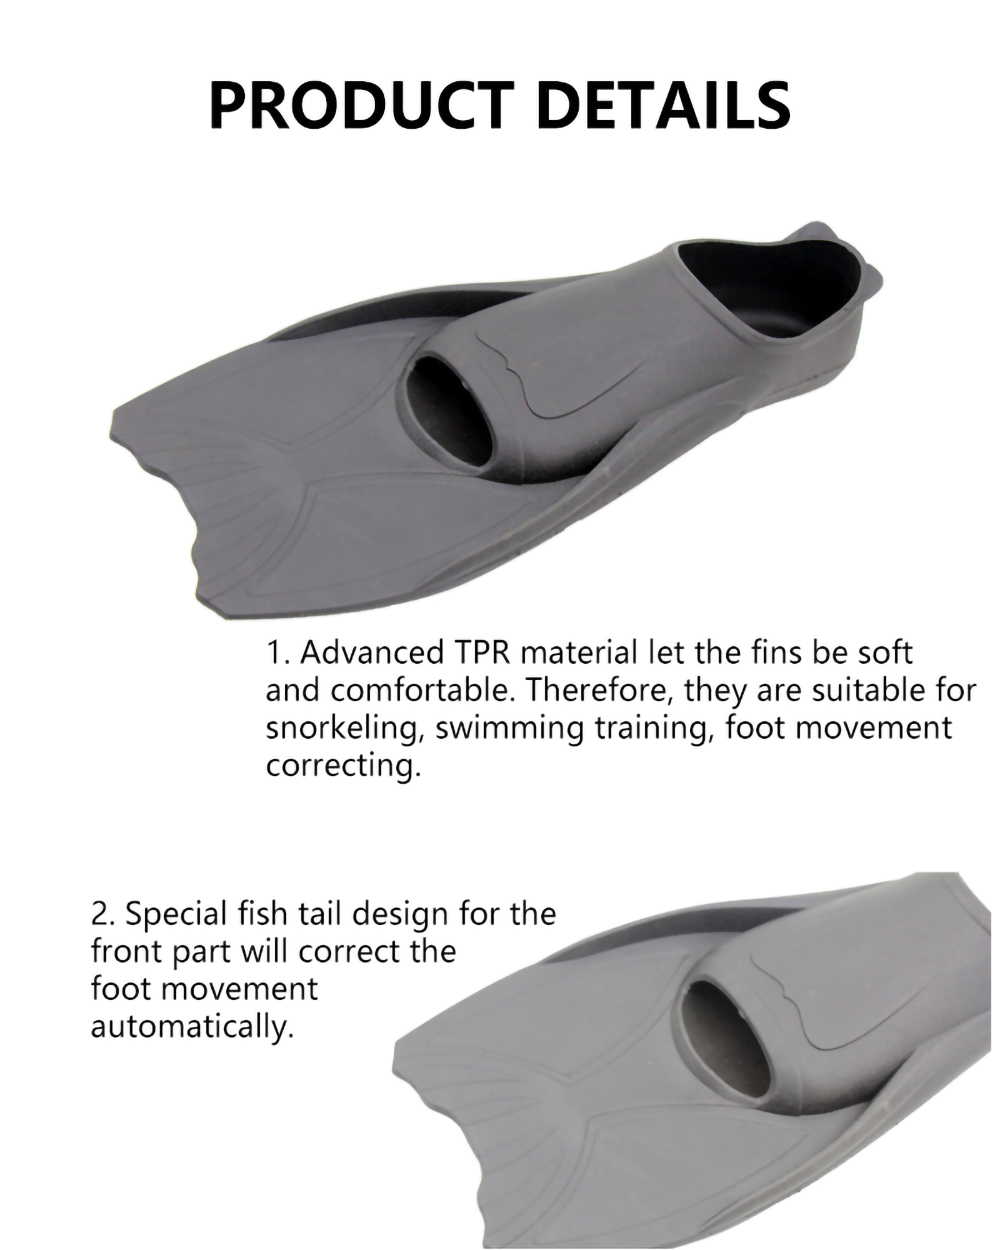 Self-adaptive Soft Full Foot Pocket Non-slip Sole Secured Tight Short Blade Swimming Training Snorkeling Diving Fins Flippers